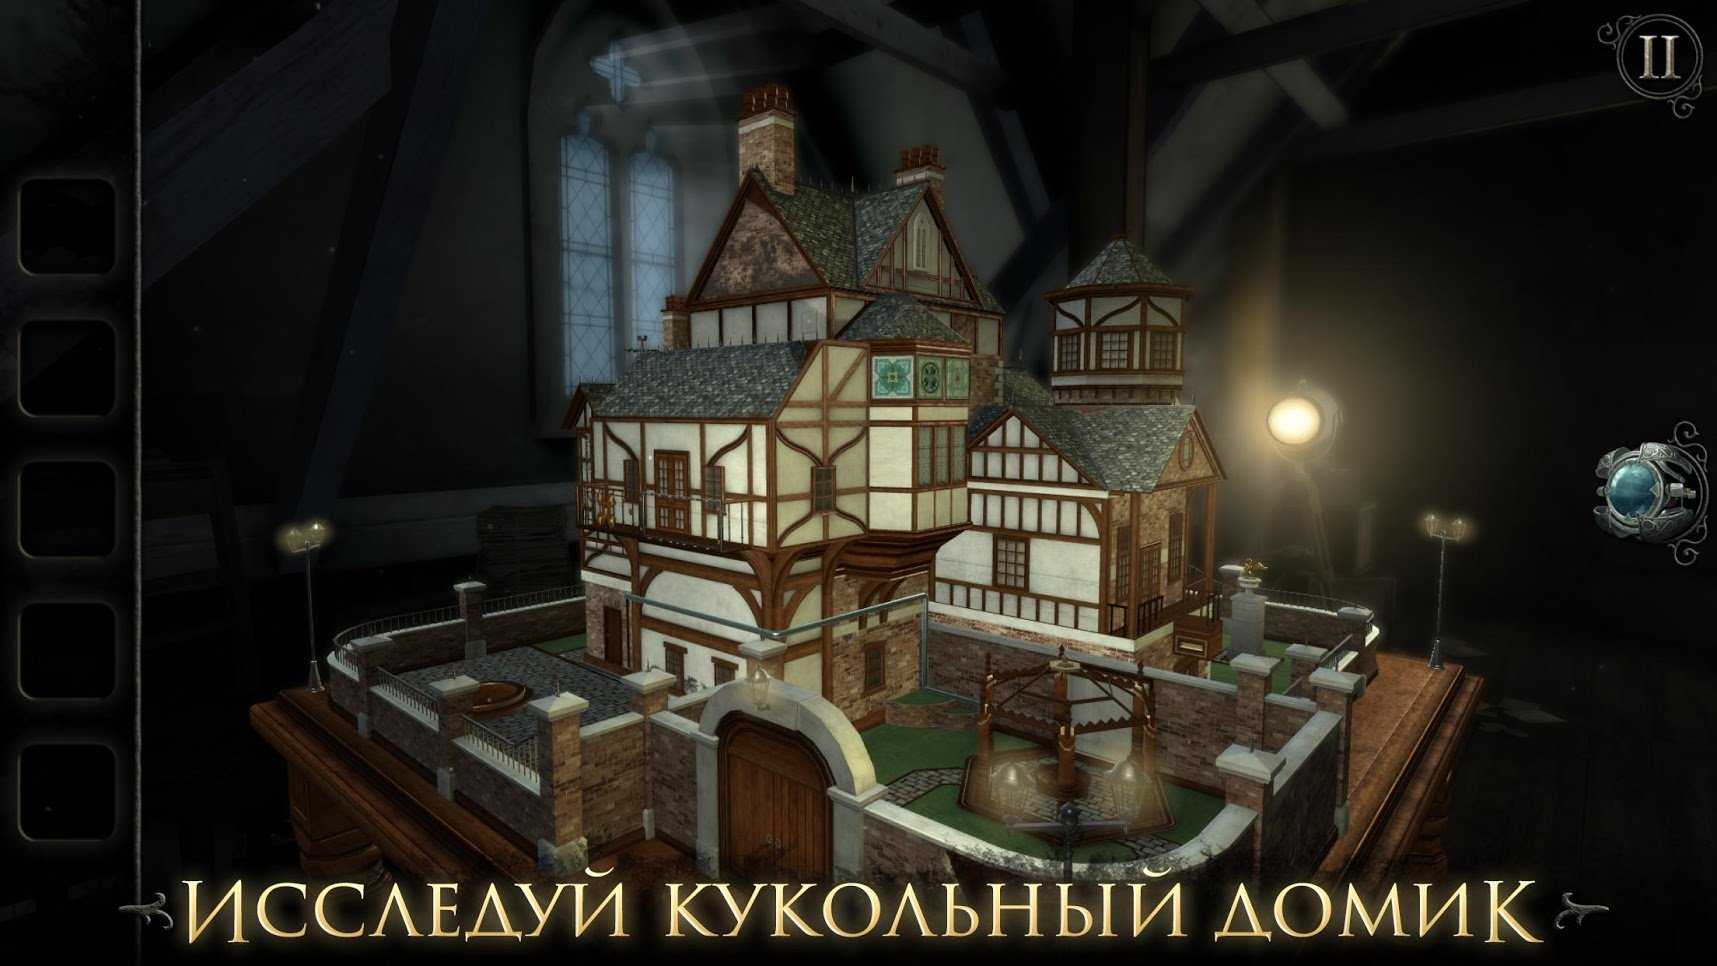 Room 4: old sins, the + видеокомната 4. старые грехи